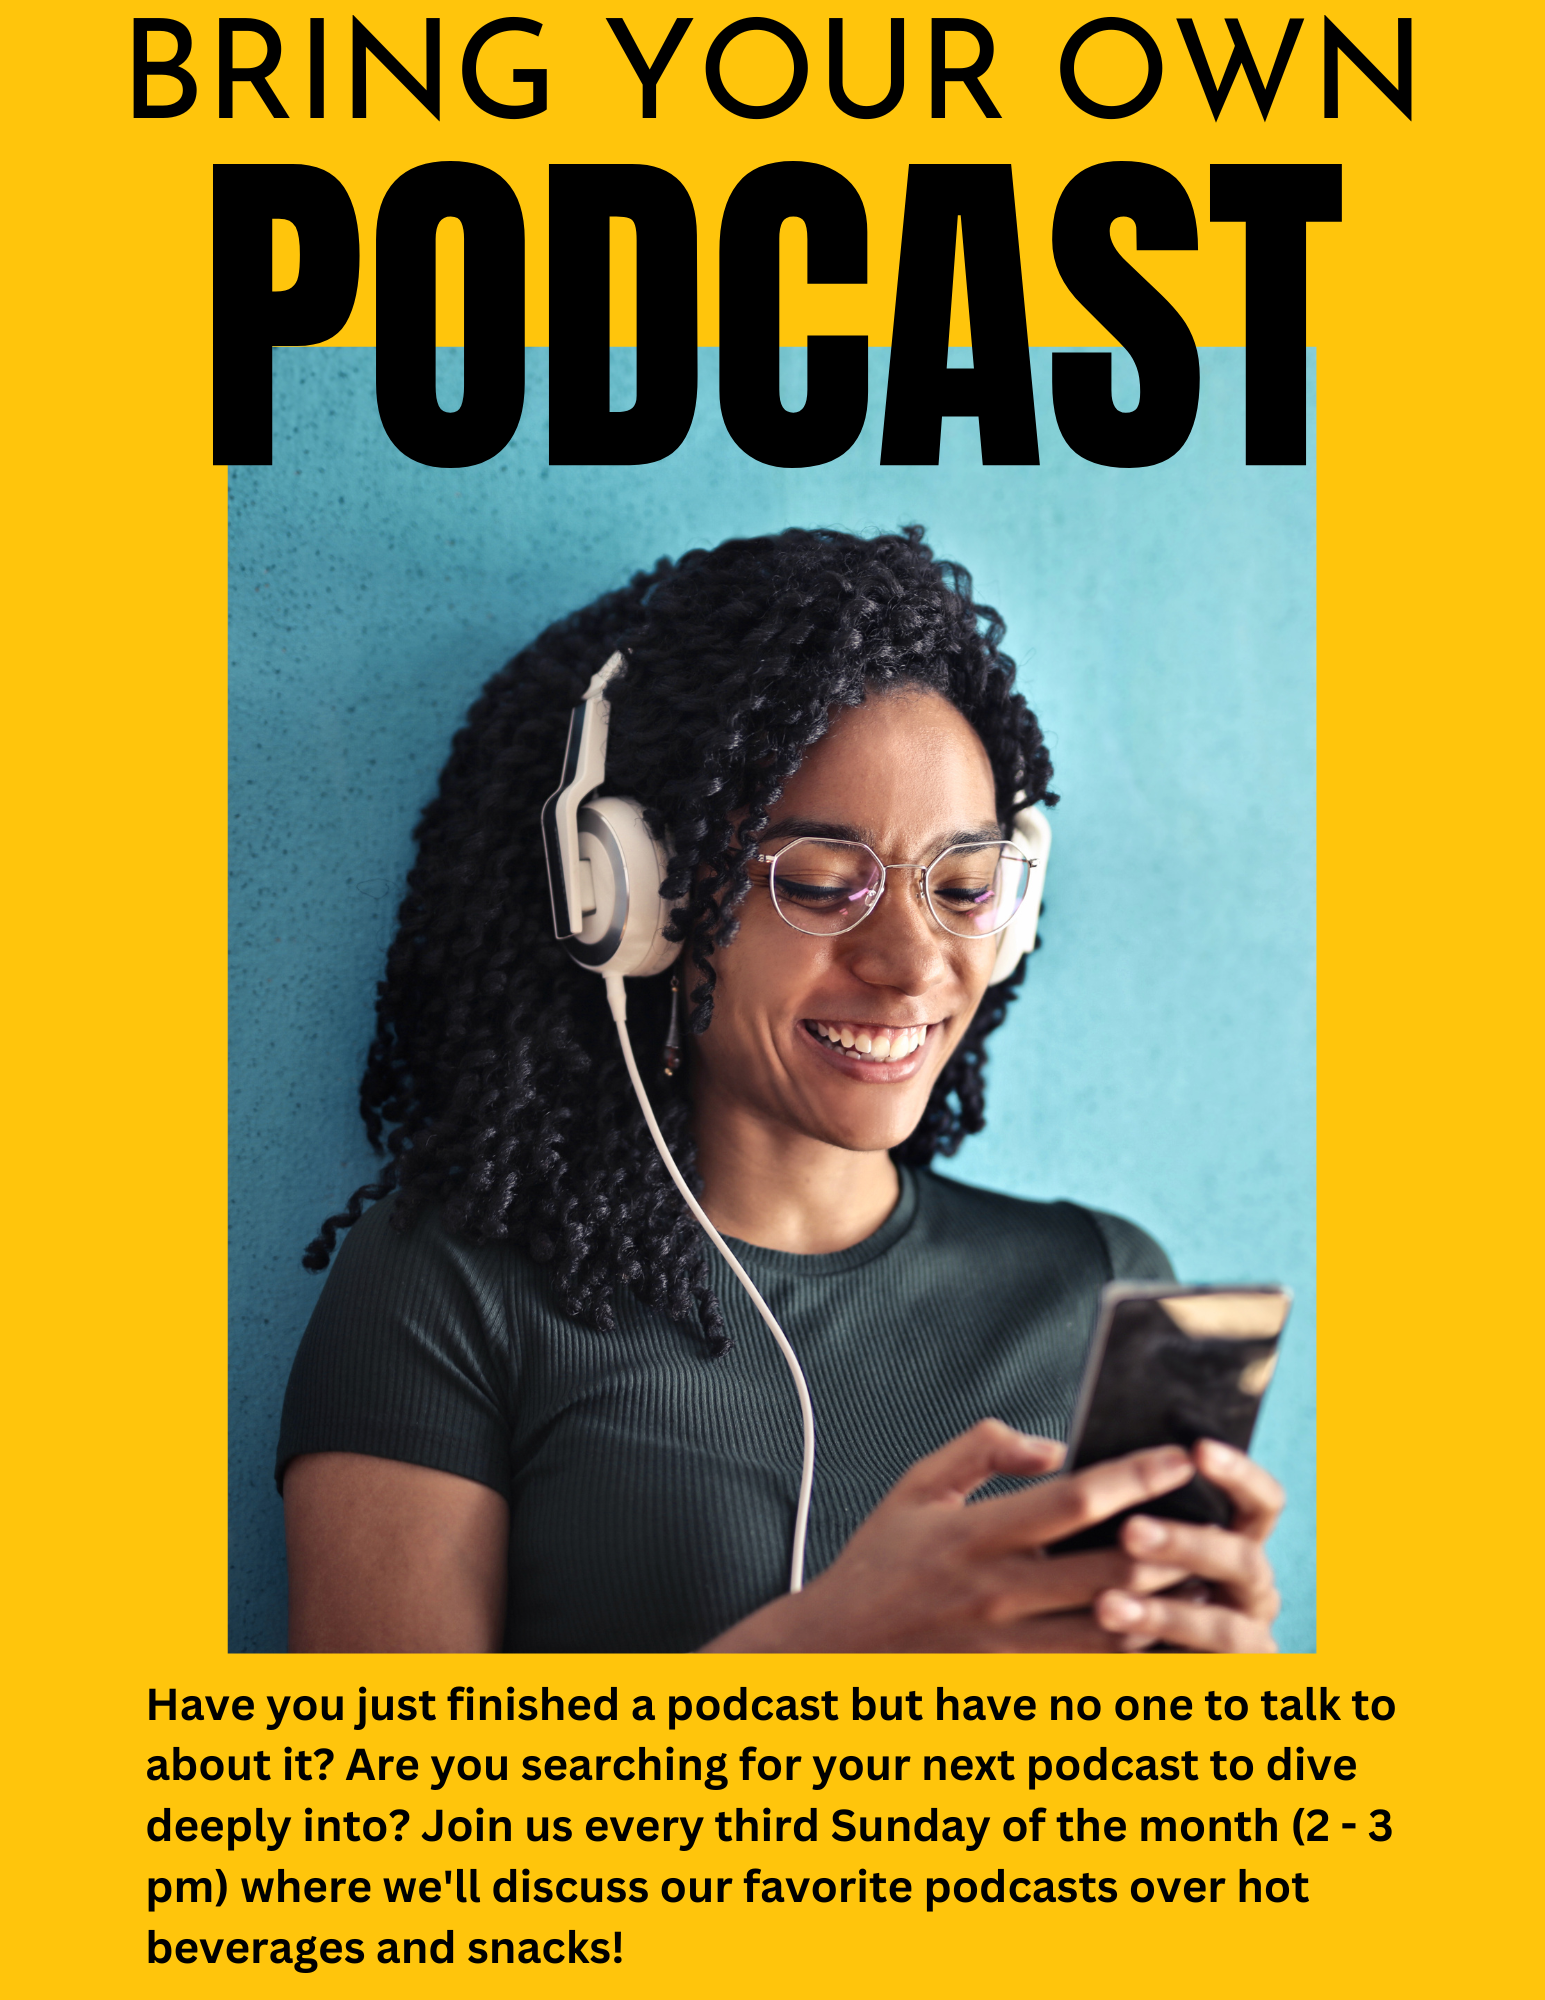 Flyer advertising Bring Your Own Podcast program. The flyer features a smiling person wearing headphones and looking at their cellphone. 